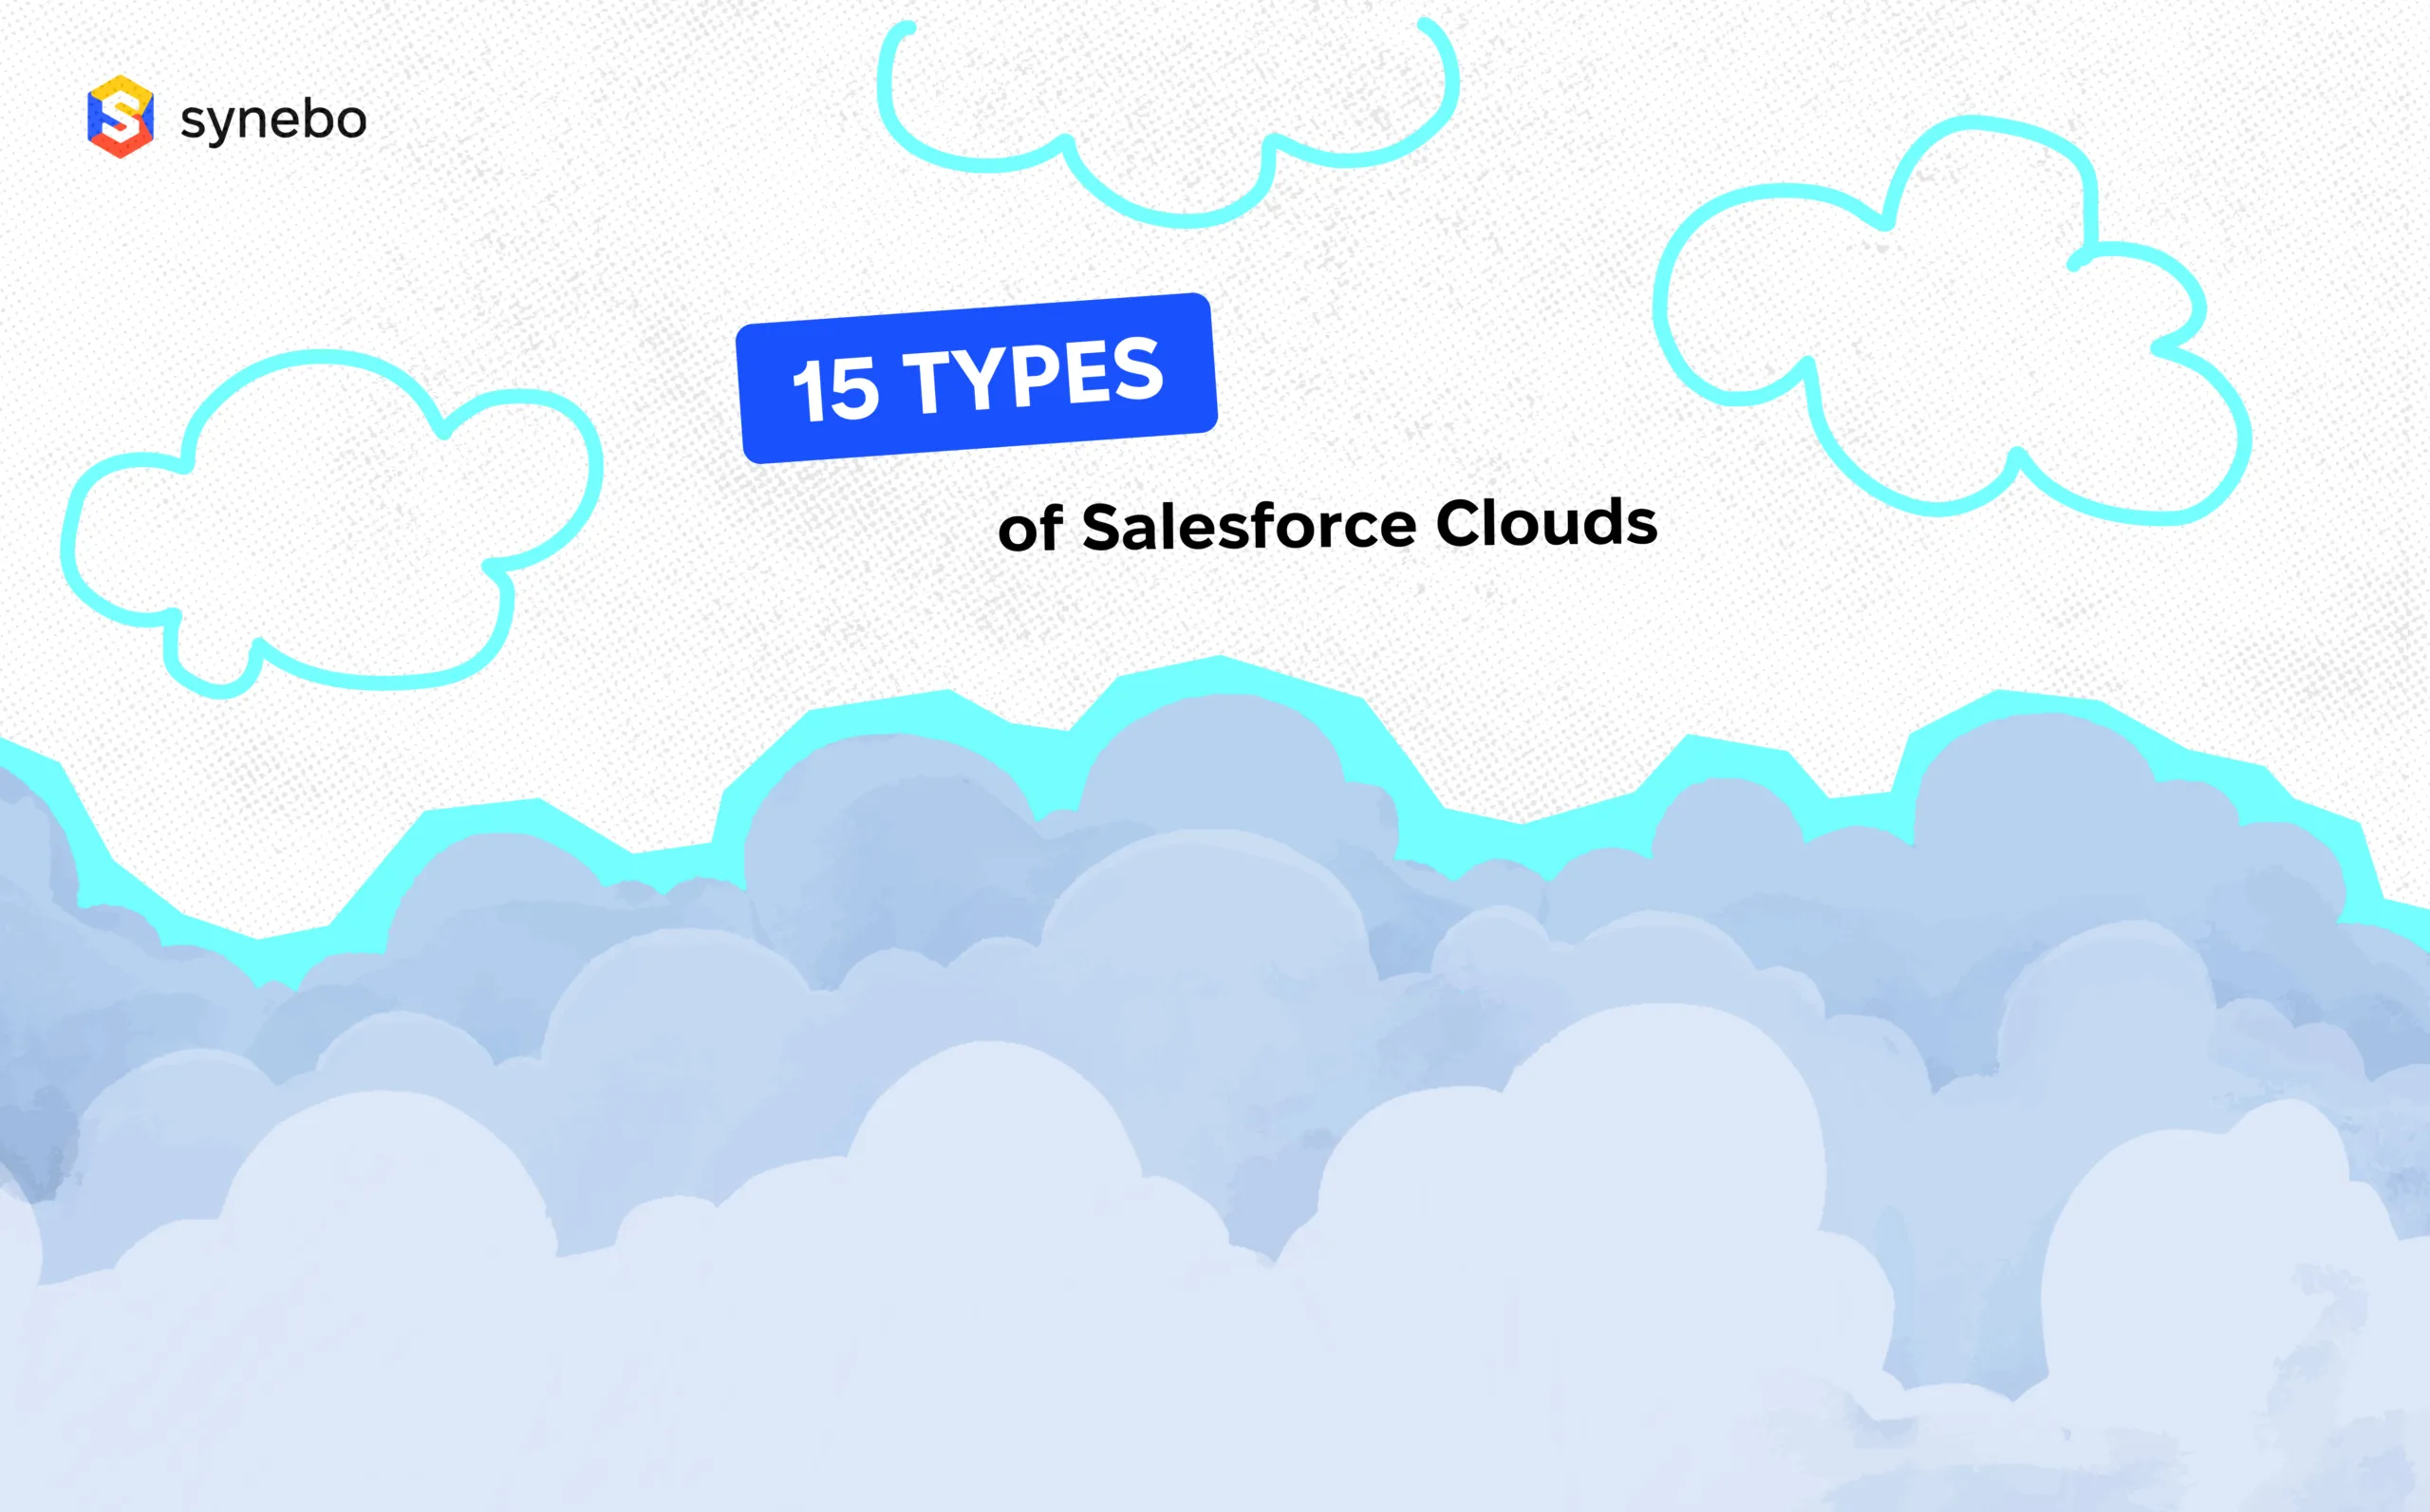 15 Types of Salesforce Clouds